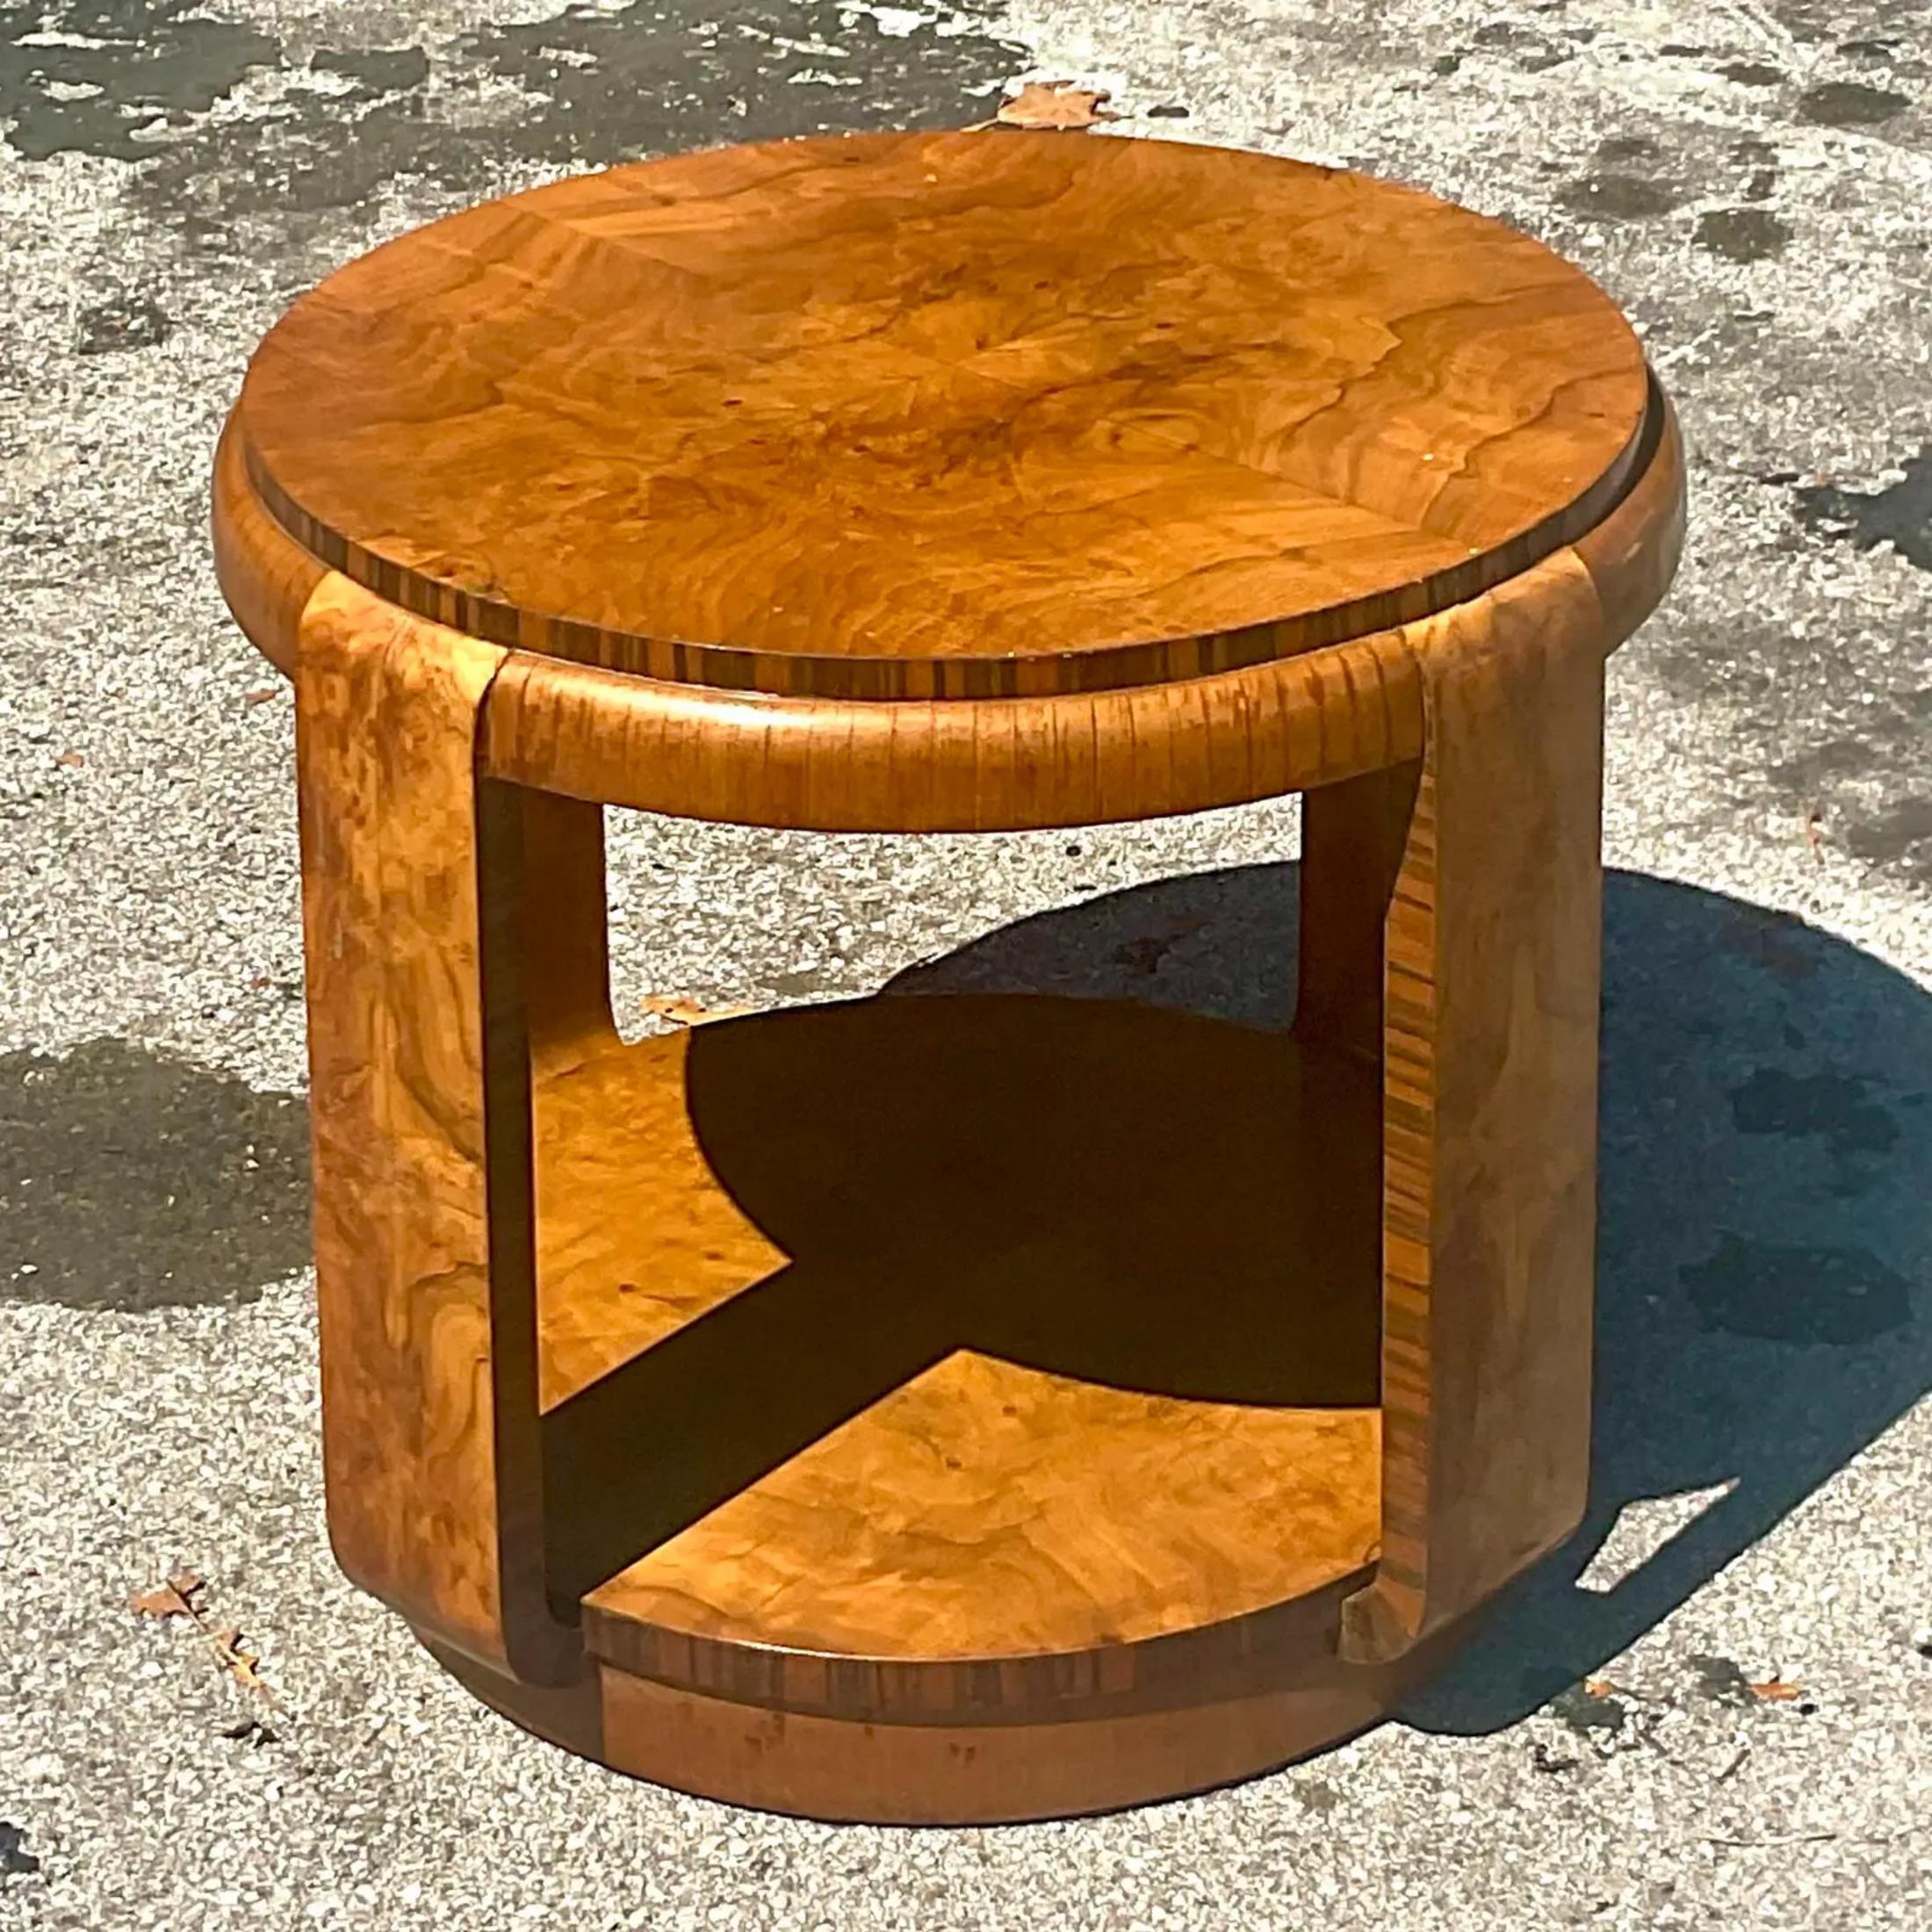 A gorgeous vintage Boho side table. A chic Burl wood construction done in the manner of Biedermeier. Perfect as a side table or even a petite coffee table. You decide! Acquired from a Palm Beach estate.